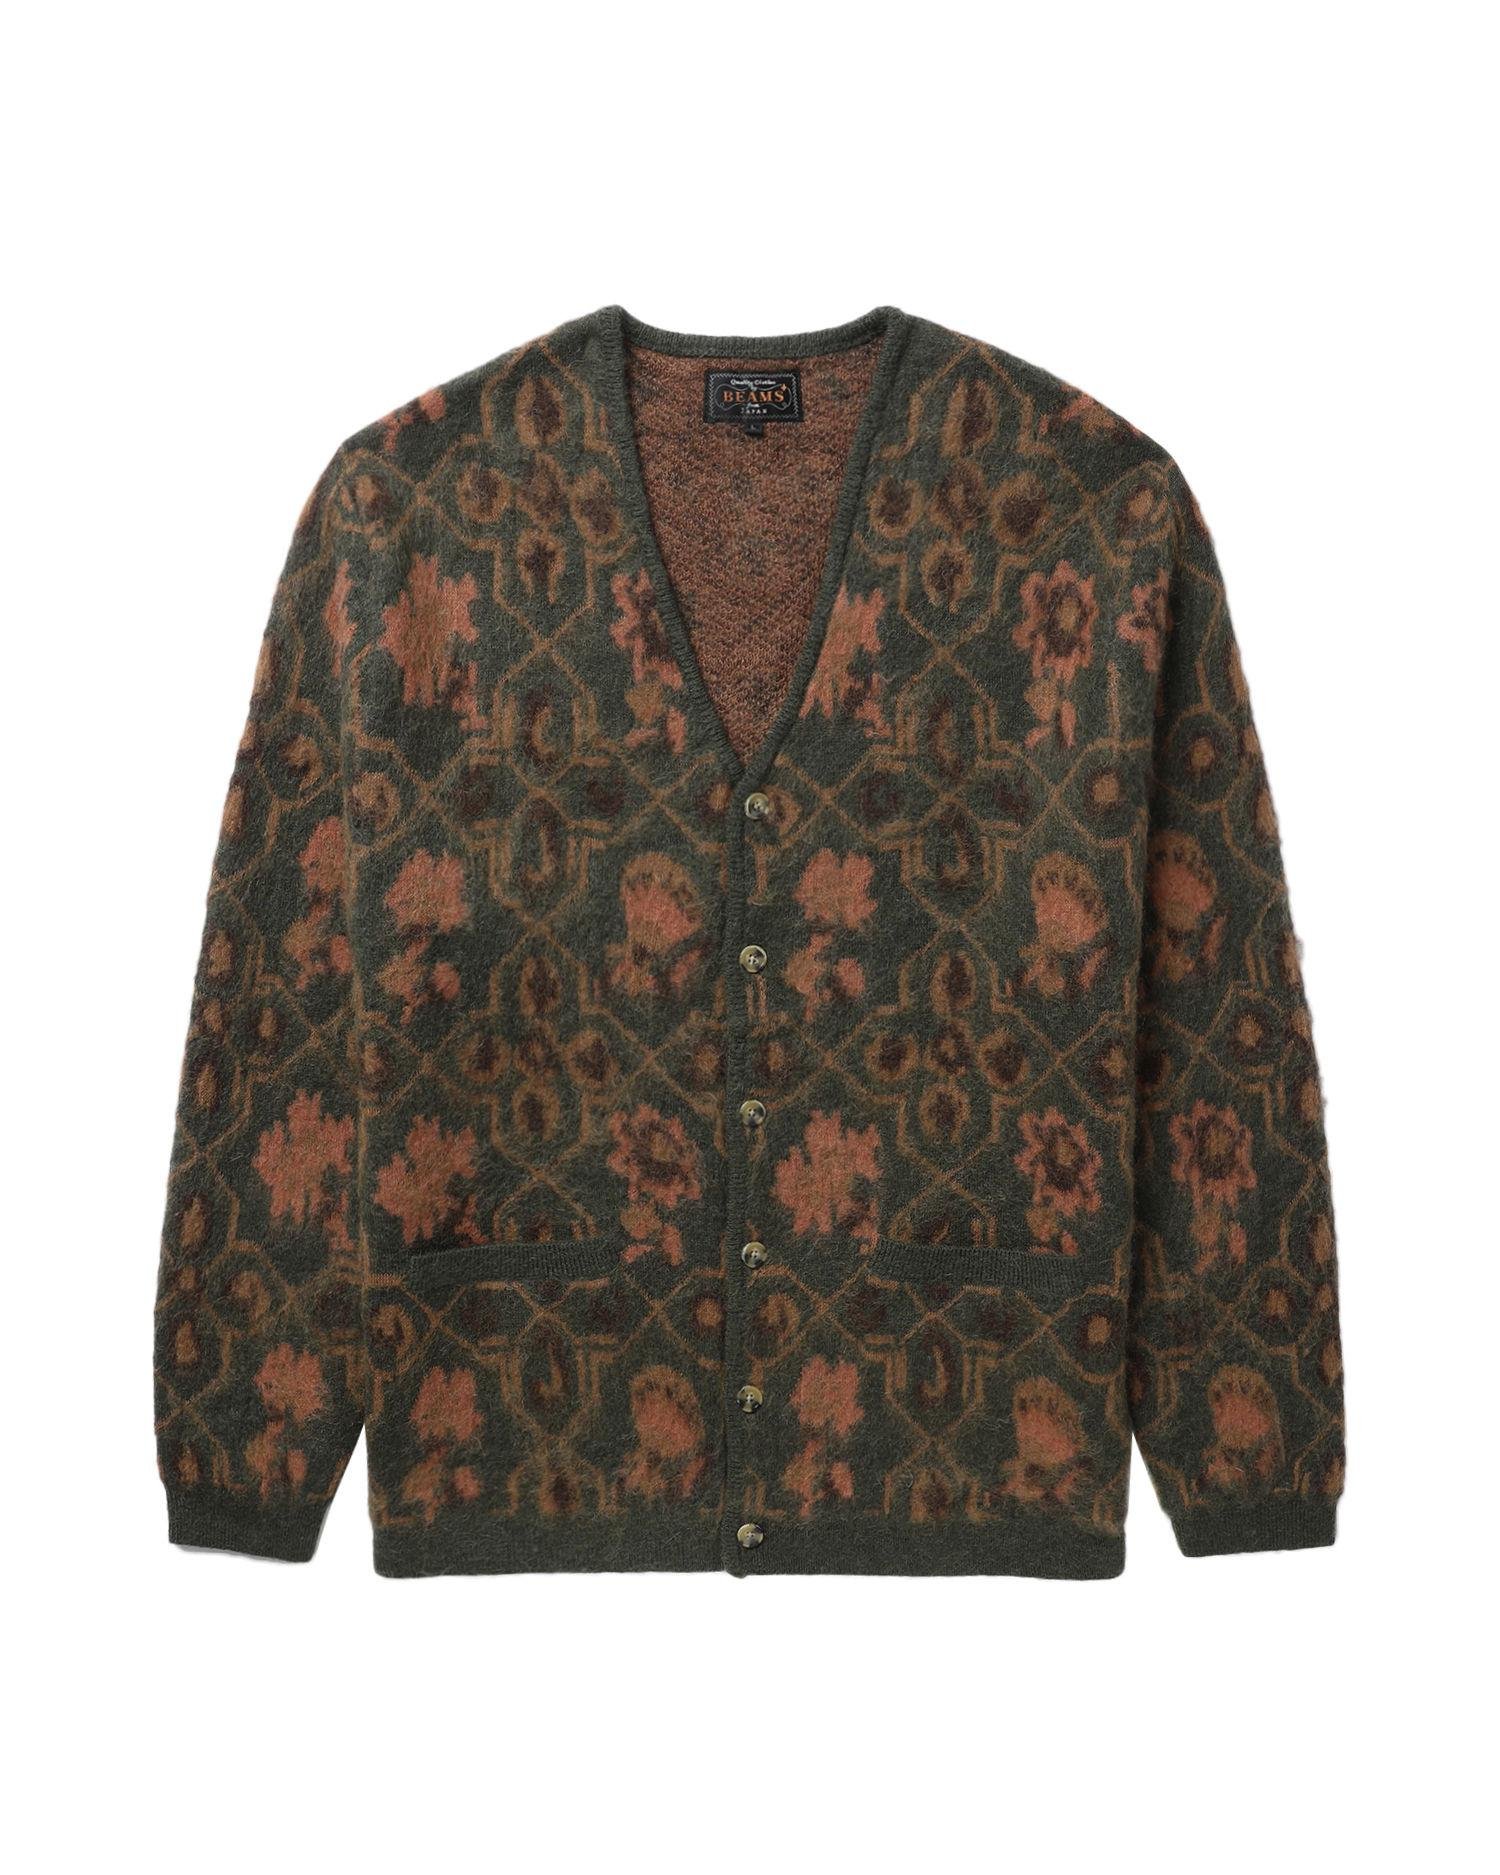 Patterned knit cardigan by BEAMS PLUS